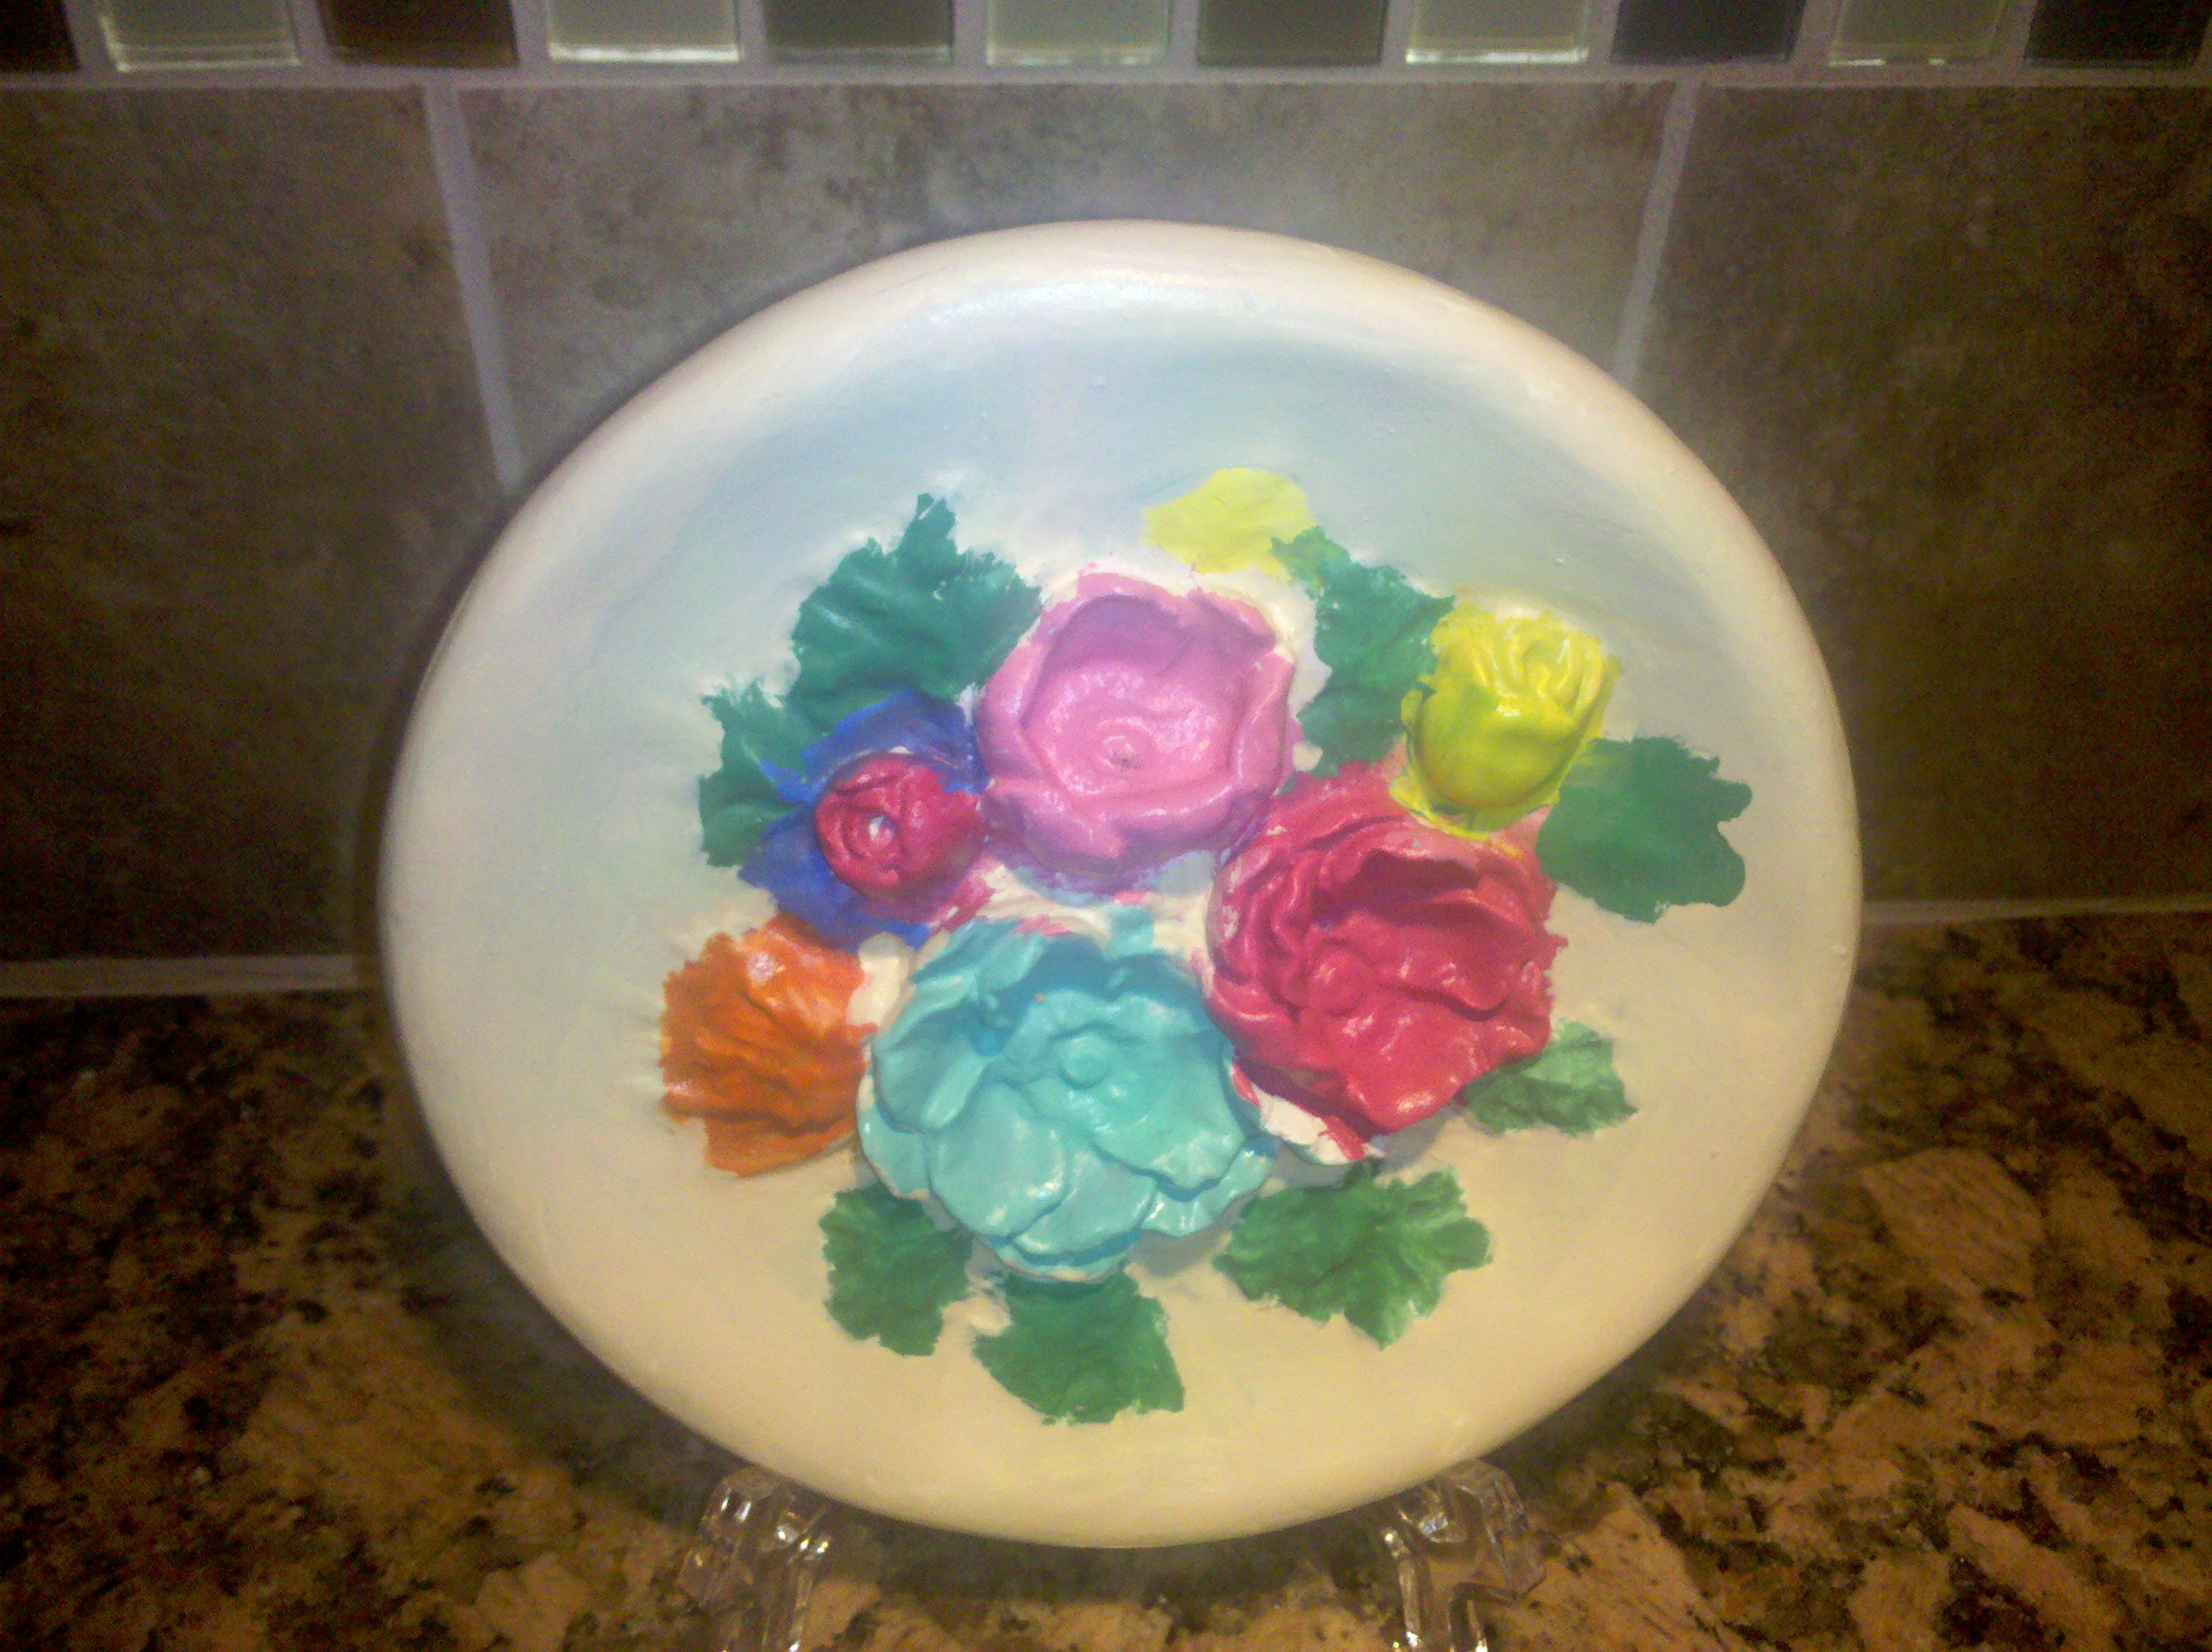 Ceramic plate with floral design